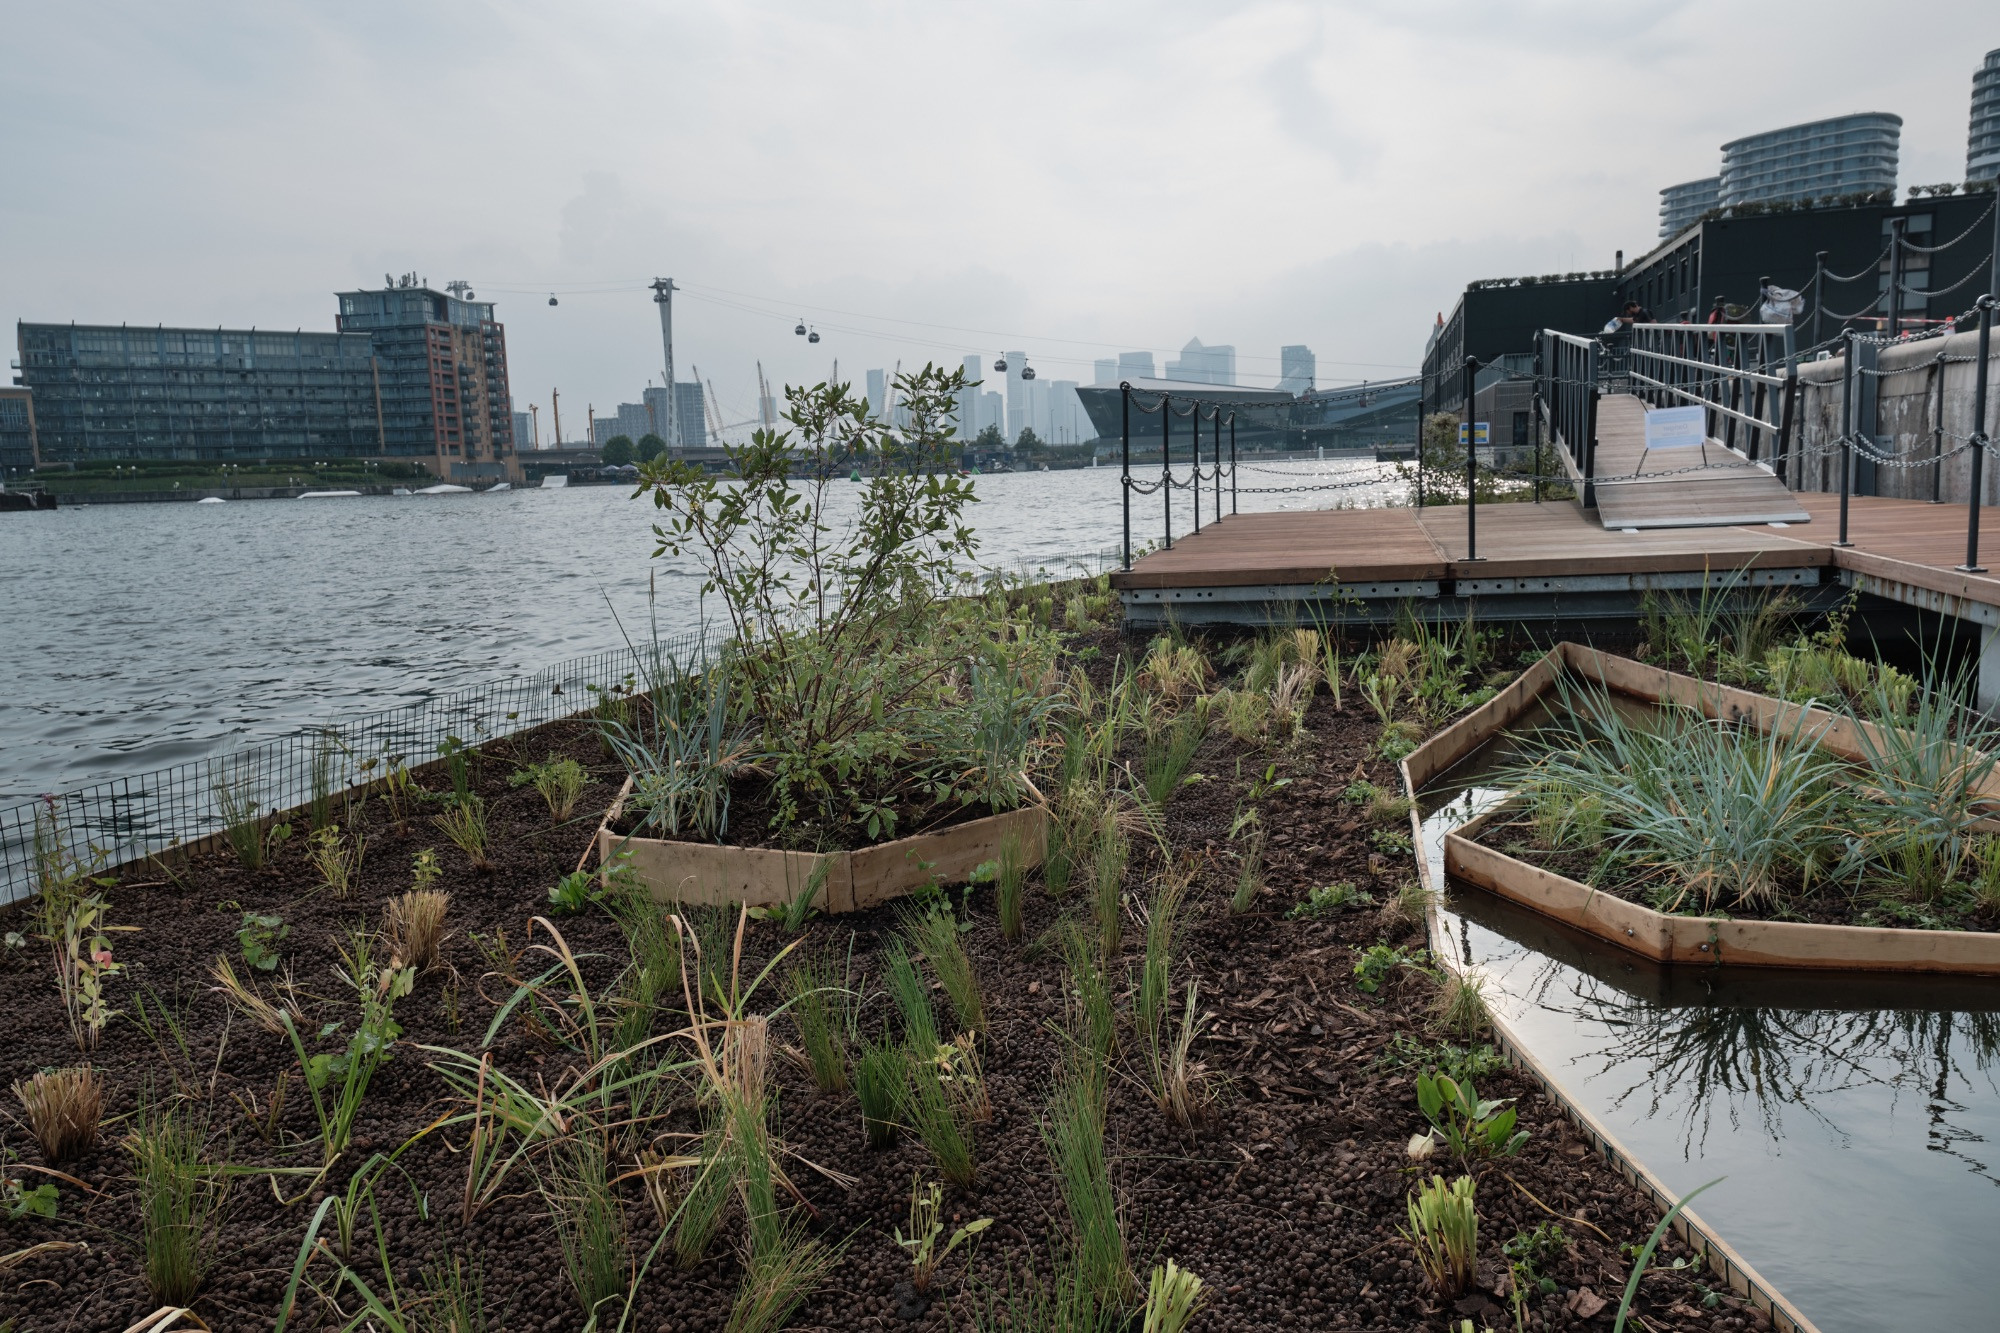 Royal Docks floating garden completed, with planting, decking and a pond